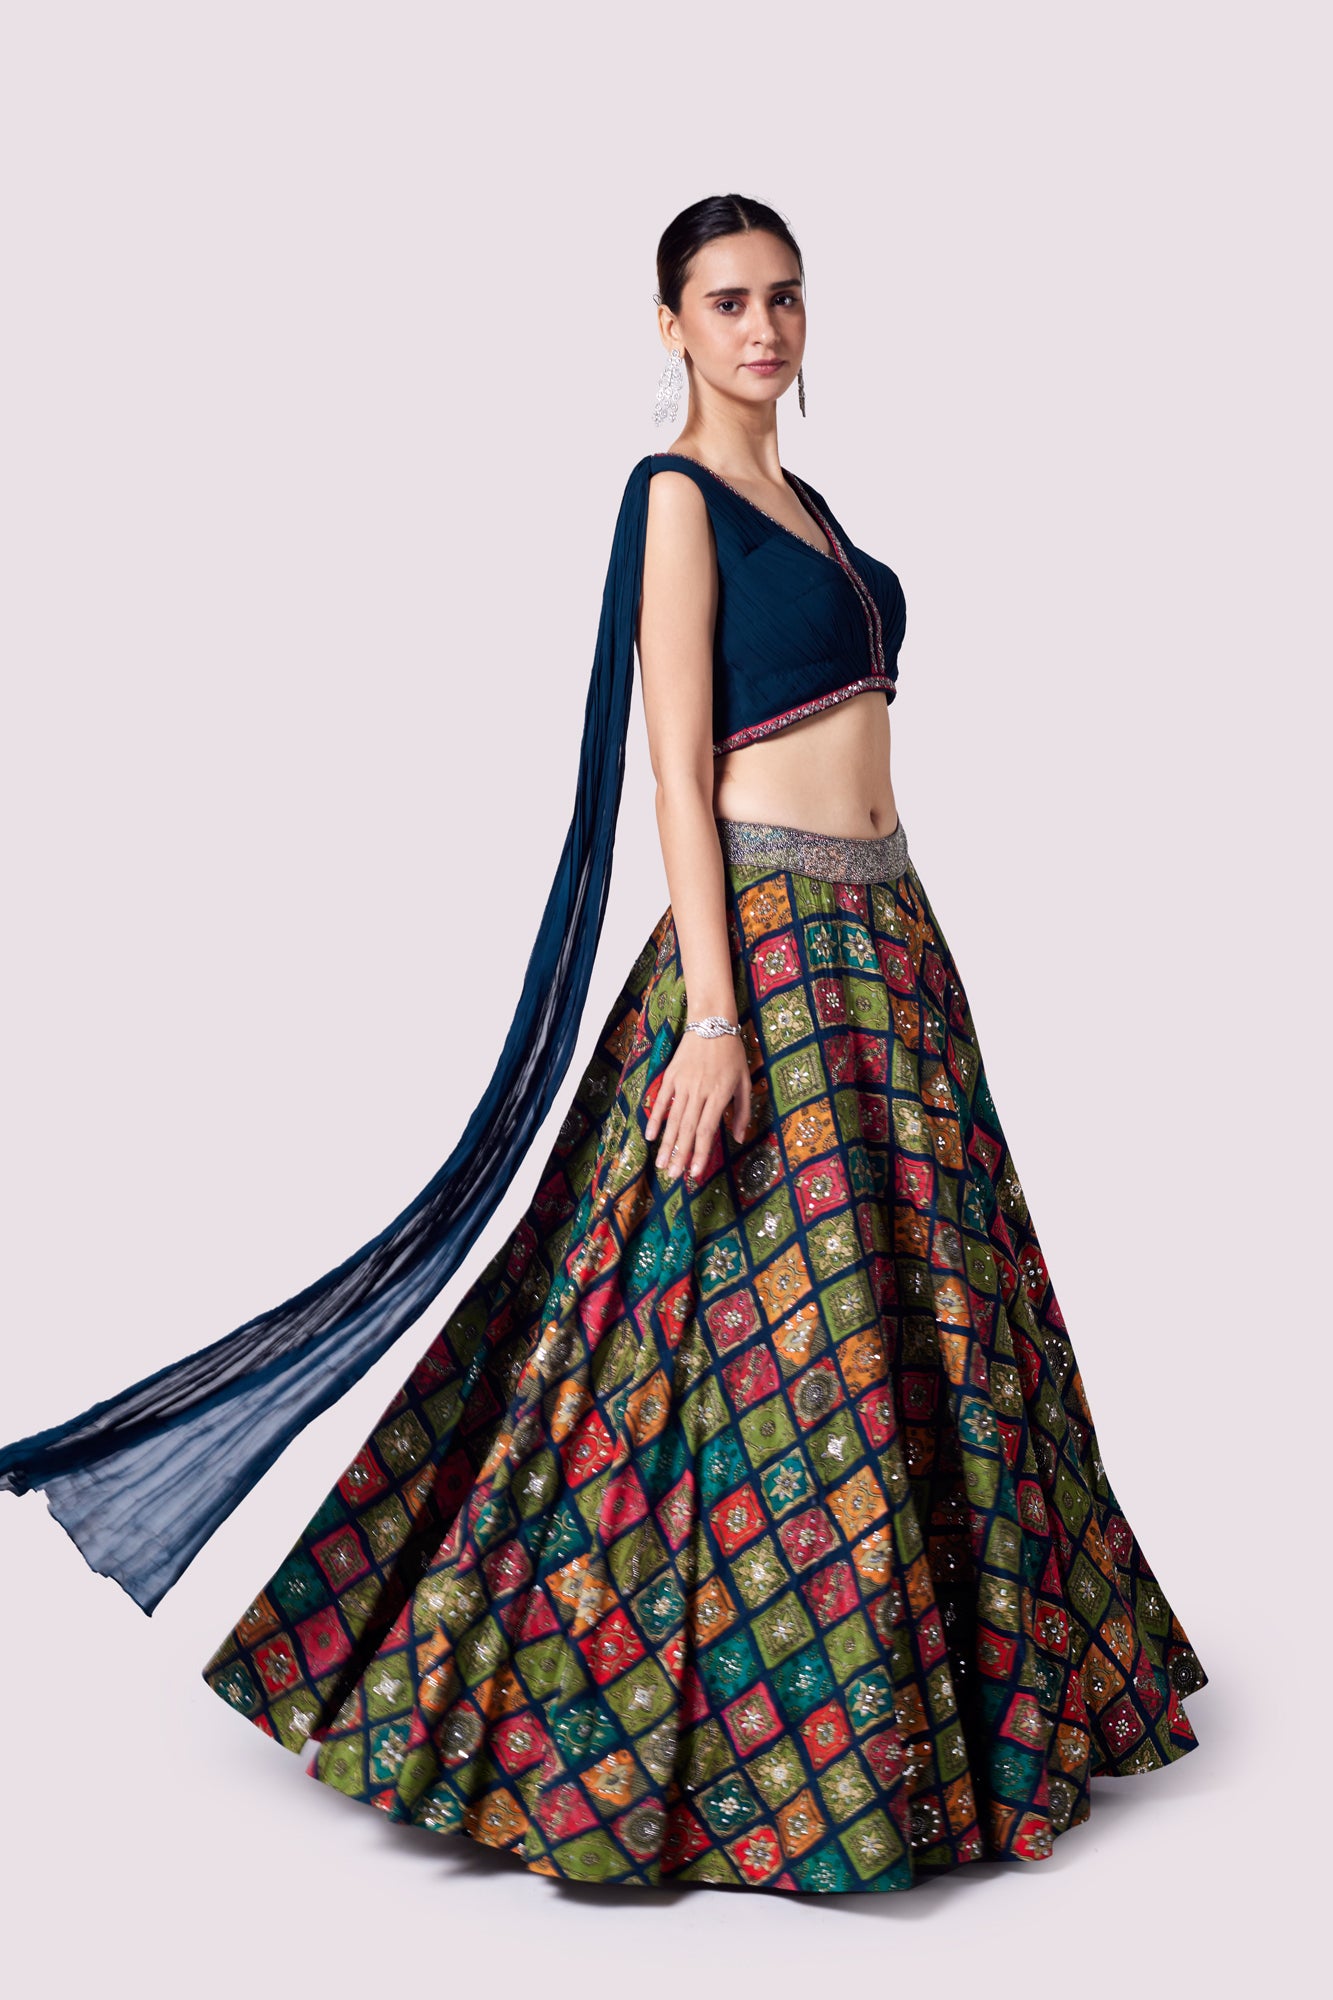 Buy blue silk skirt online in USA with georgette pleated top. Shop the best and latest designs in embroidered sarees, designer sarees, Anarkali suit, lehengas, sharara suits for weddings and special occasions from Pure Elegance Indian fashion store in USA.-skirt